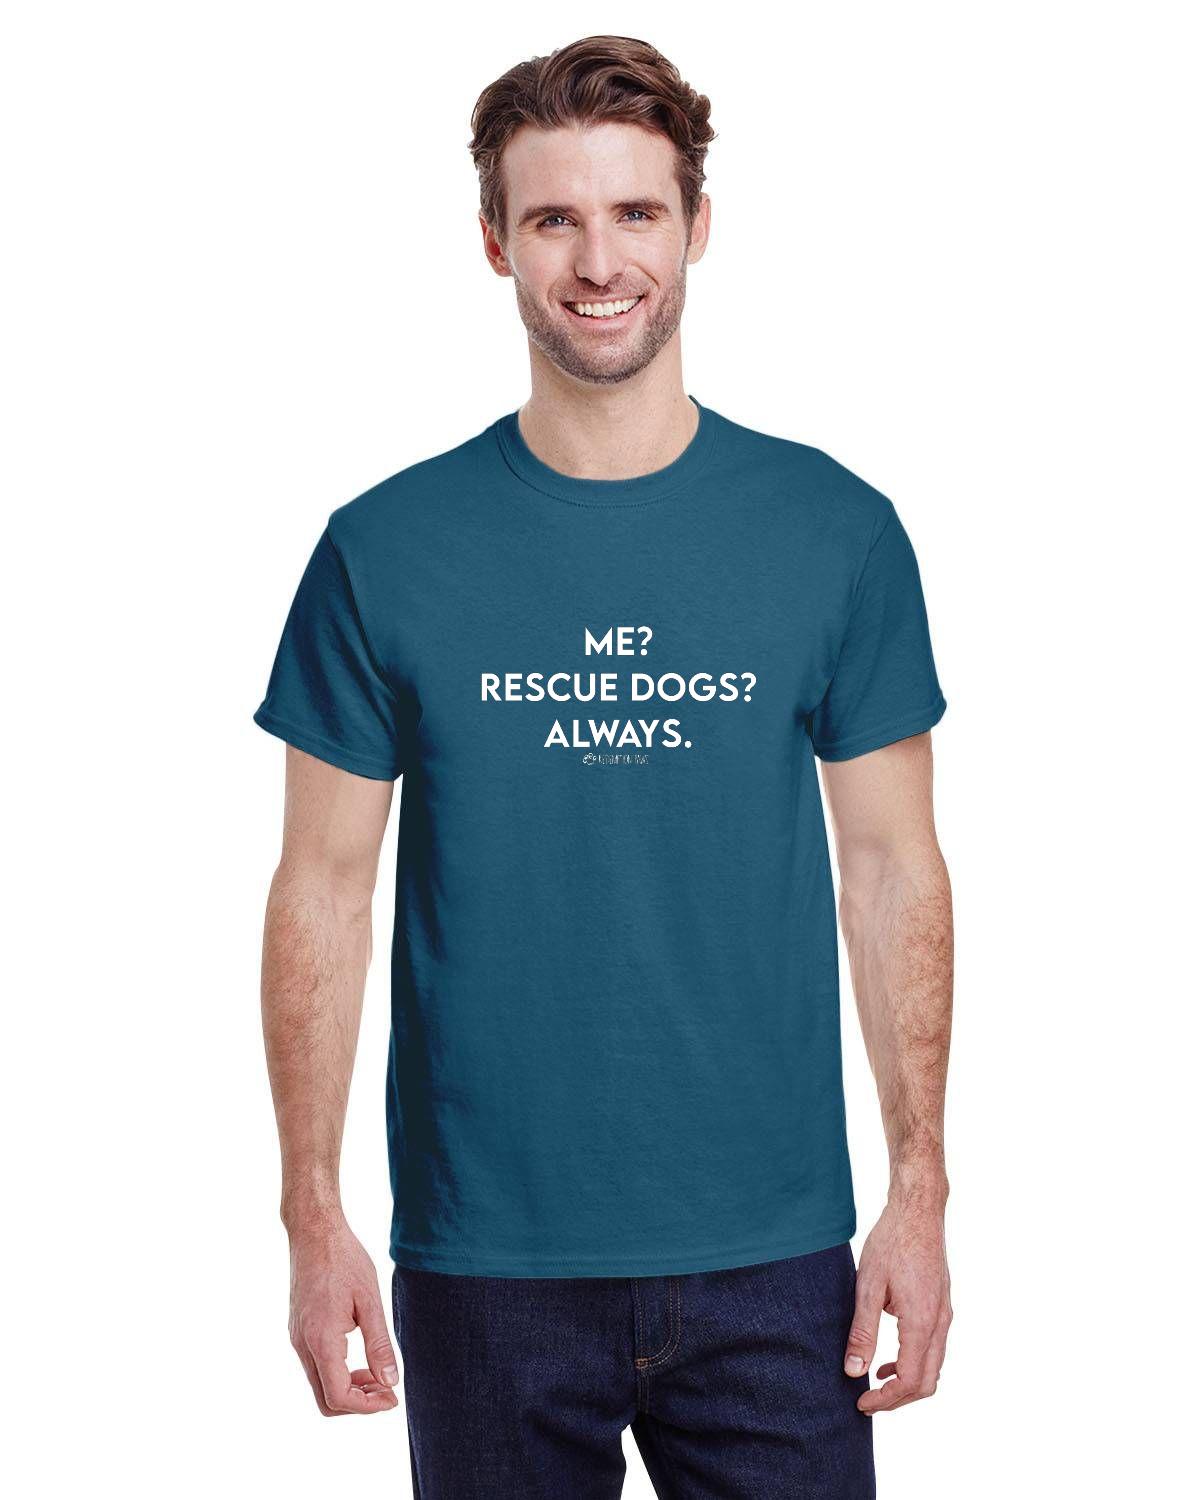 Me? Rescue Dogs? Always. T-Shirt